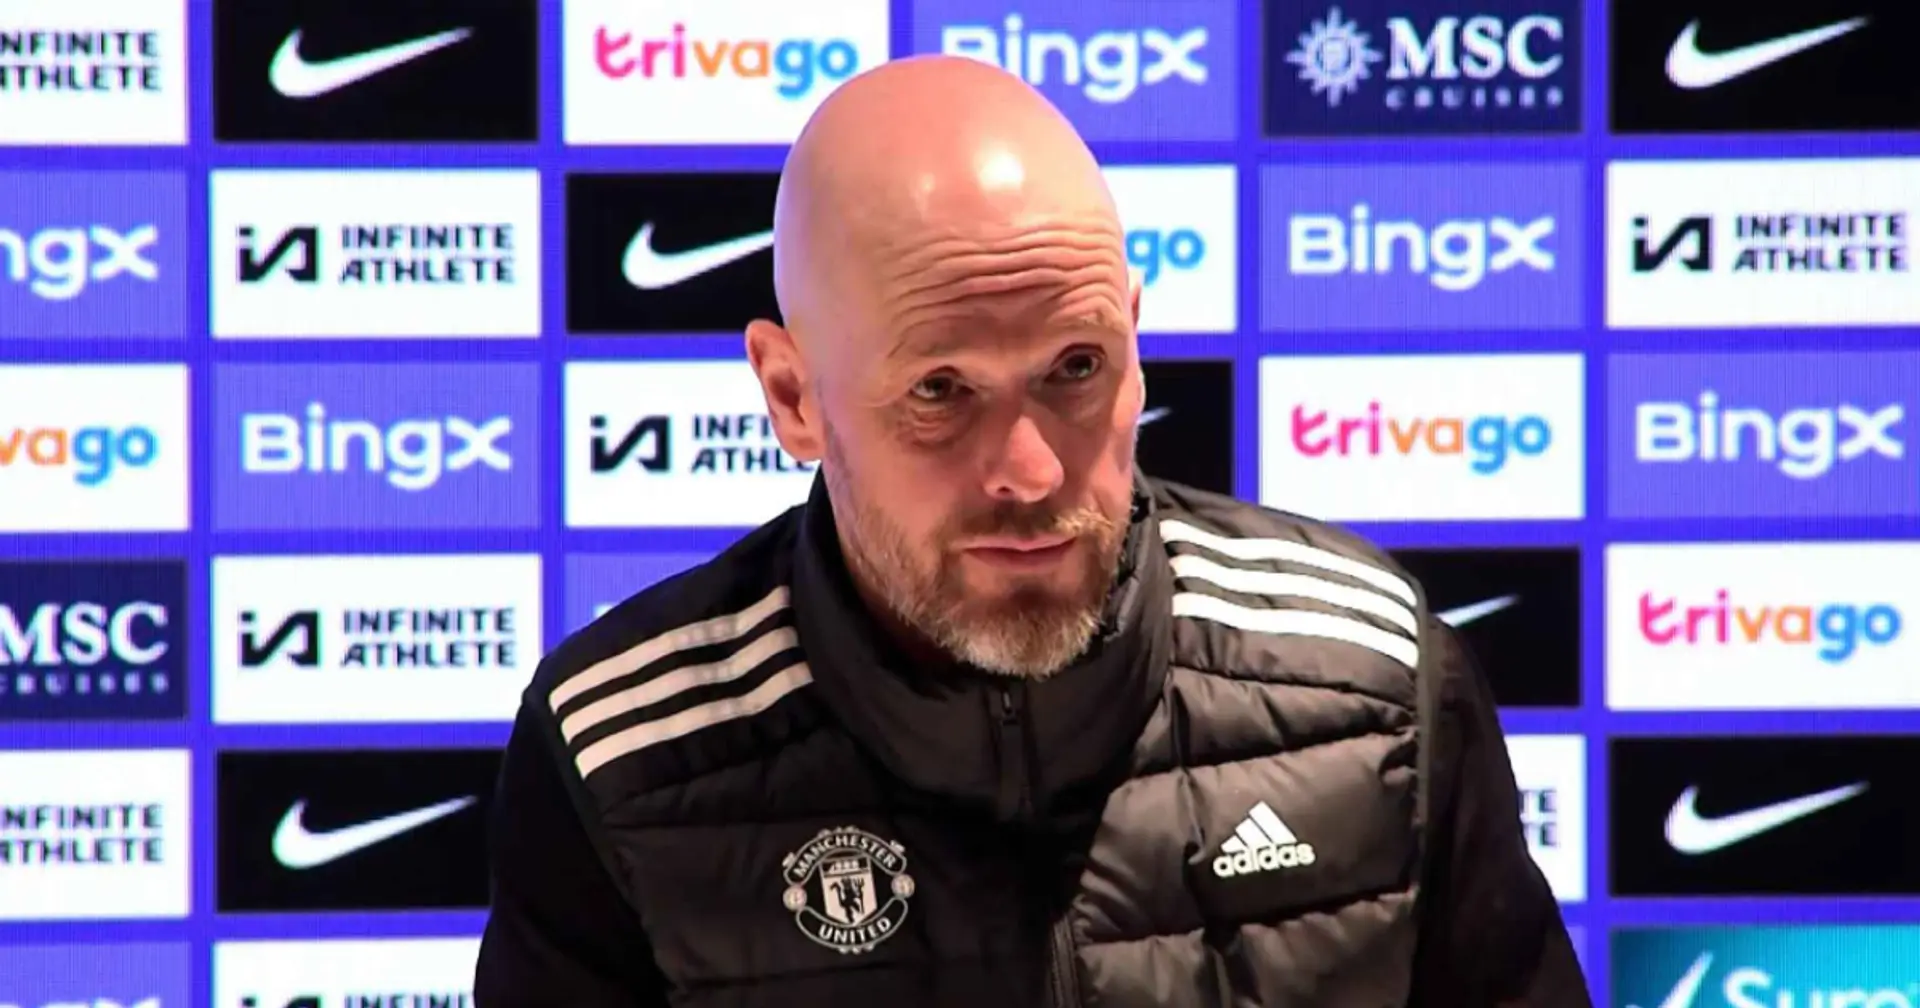 'We will be mad, angry': Erik ten Hag on Man United mood ahead of Liverpool clash